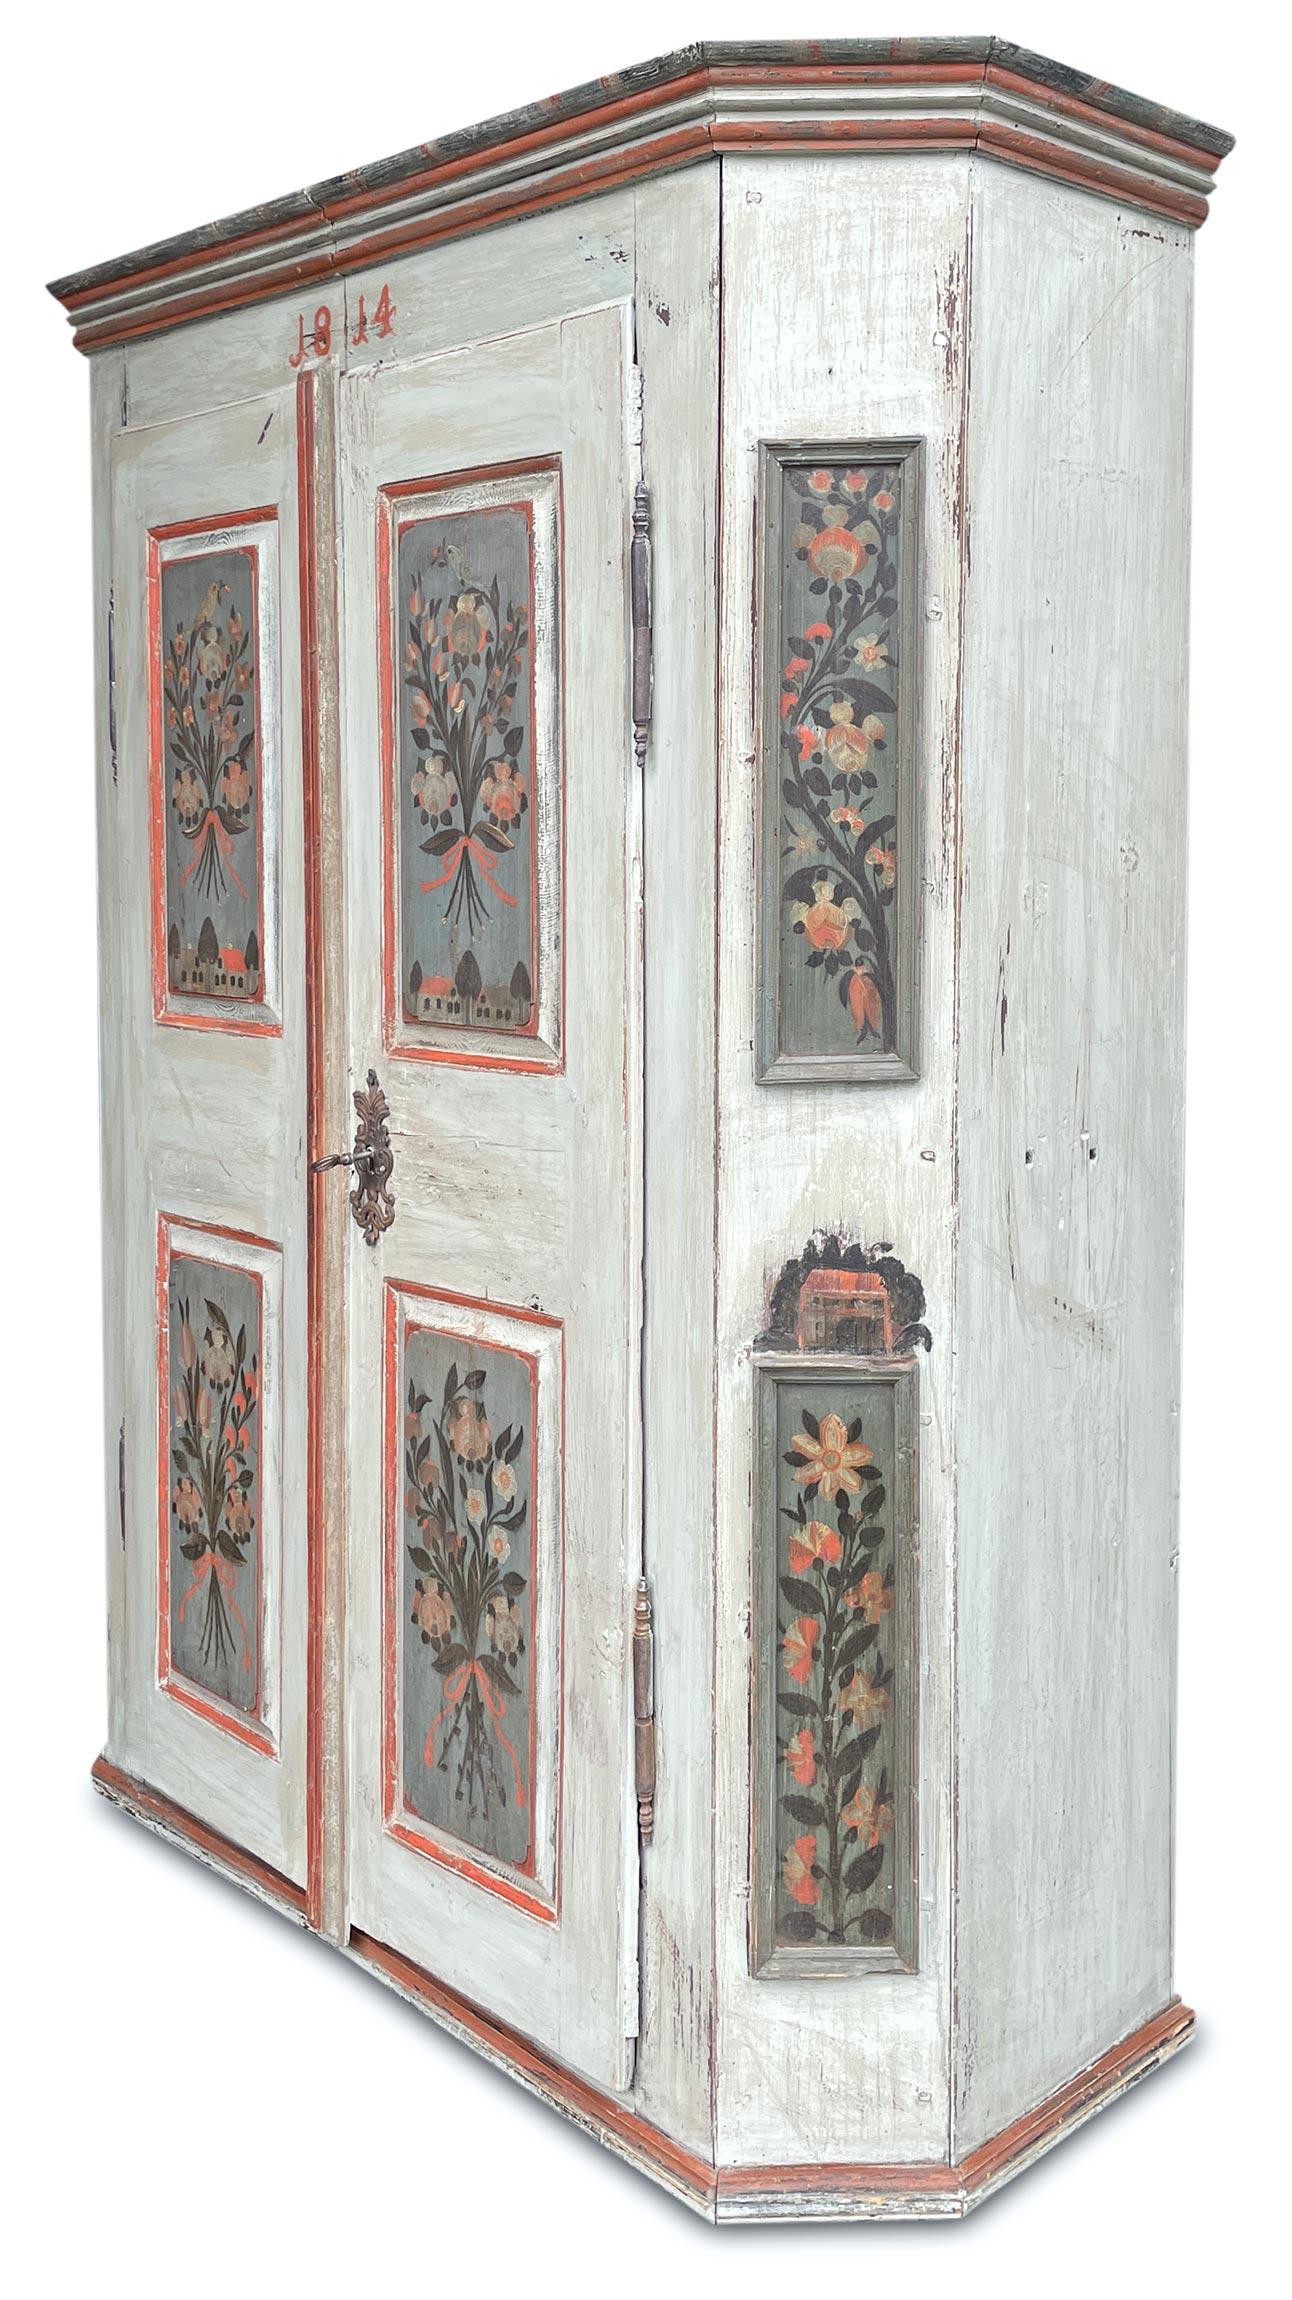 Light blue Tyrolean wardrobe dated 1814

Measurements: H.178 cm – L.132 cm (140 at the frames) – D.48 cm (52 at the frames)

Tyrolean wardrobe, with two doors, entirely painted in light blue. On the doors, four diamond and ashlar mirrors enclose